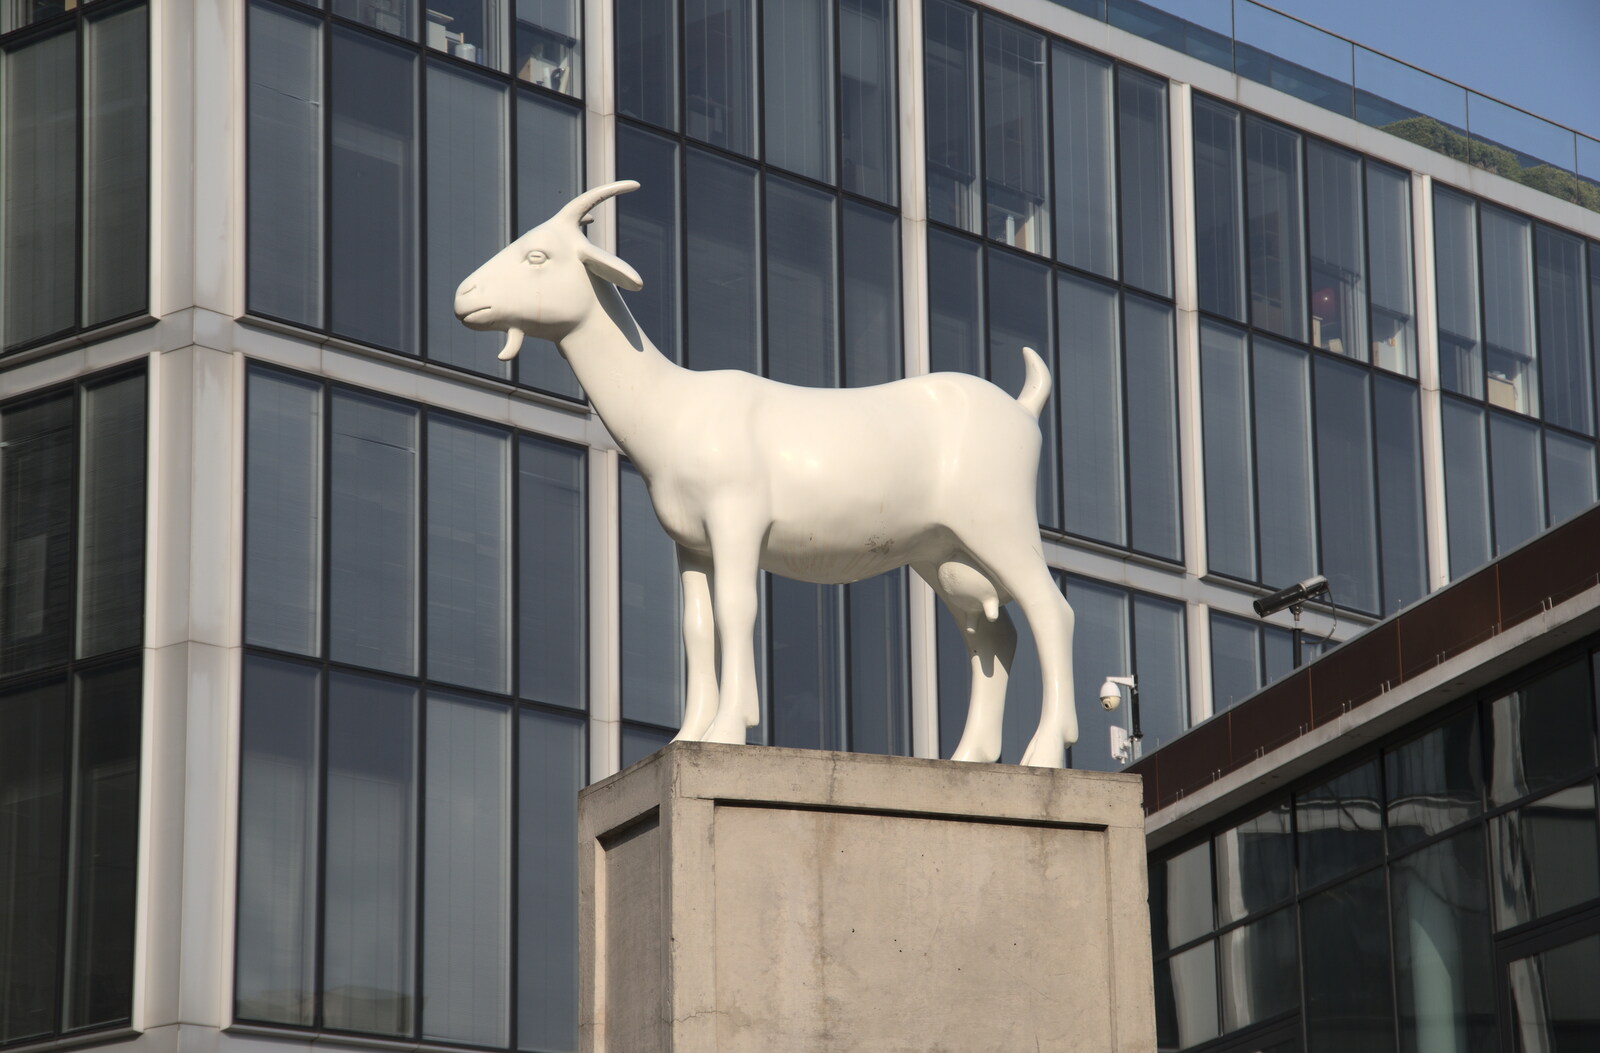 The Spitalfields' Goat statue from Genesis at the O2, North Greenwich, London - 24th March 2022